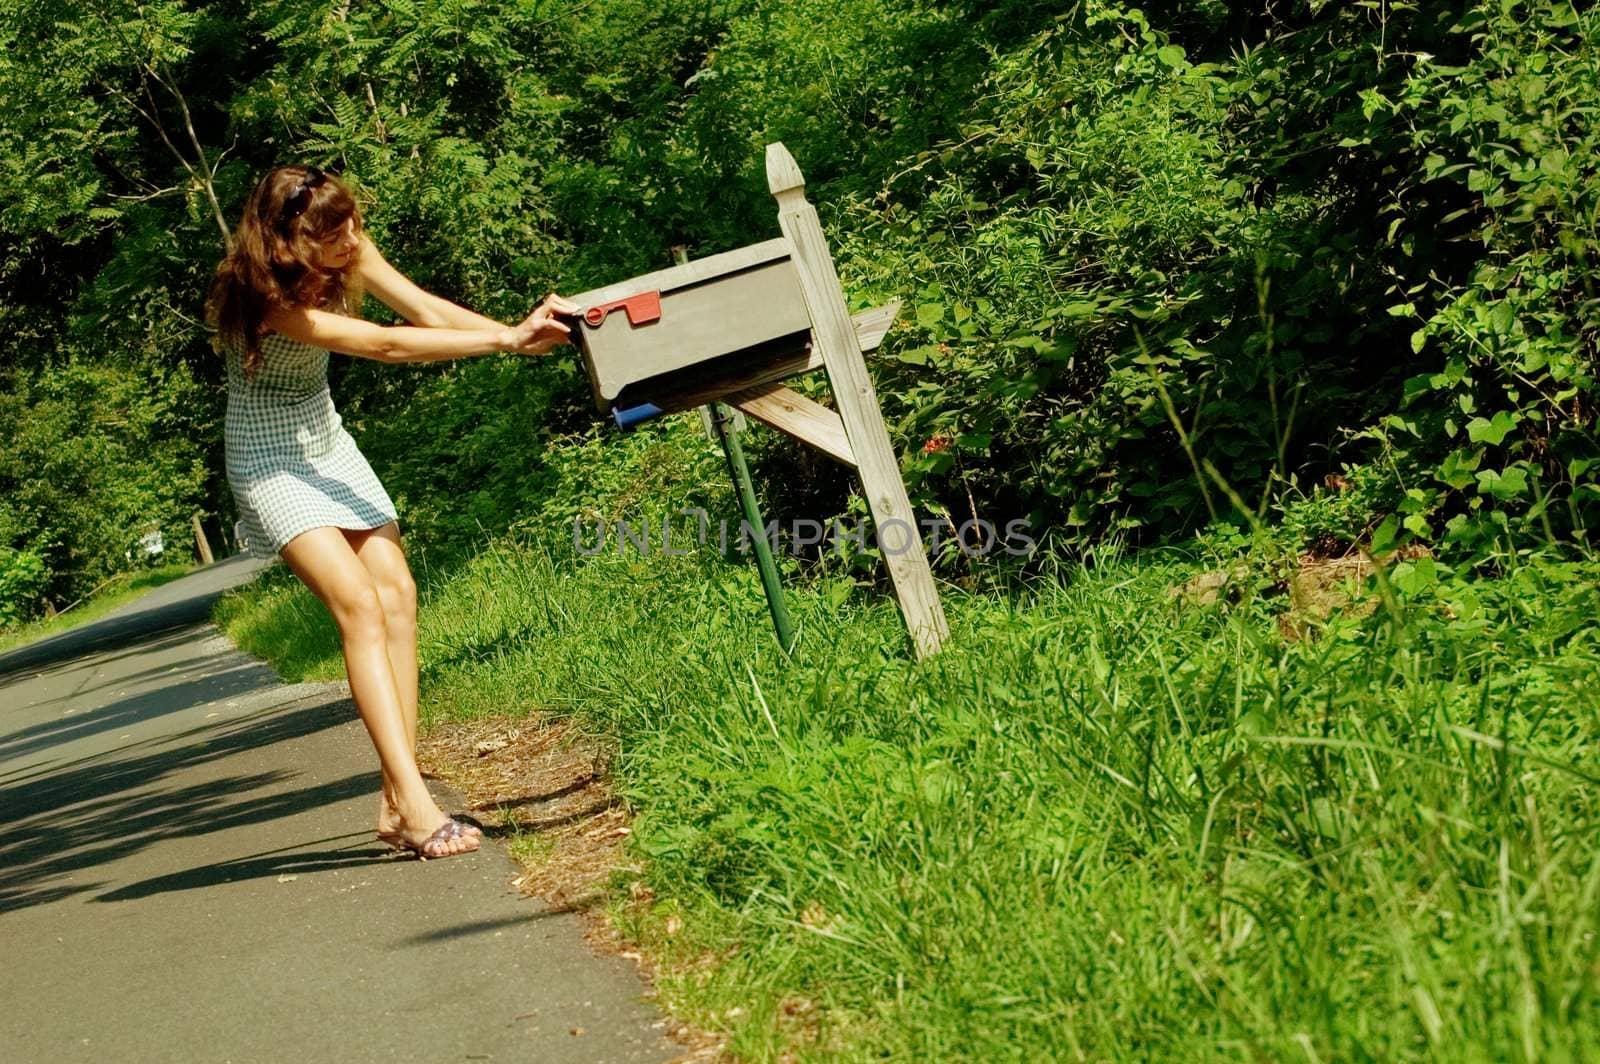 Pretty girl checking mail box for mail.